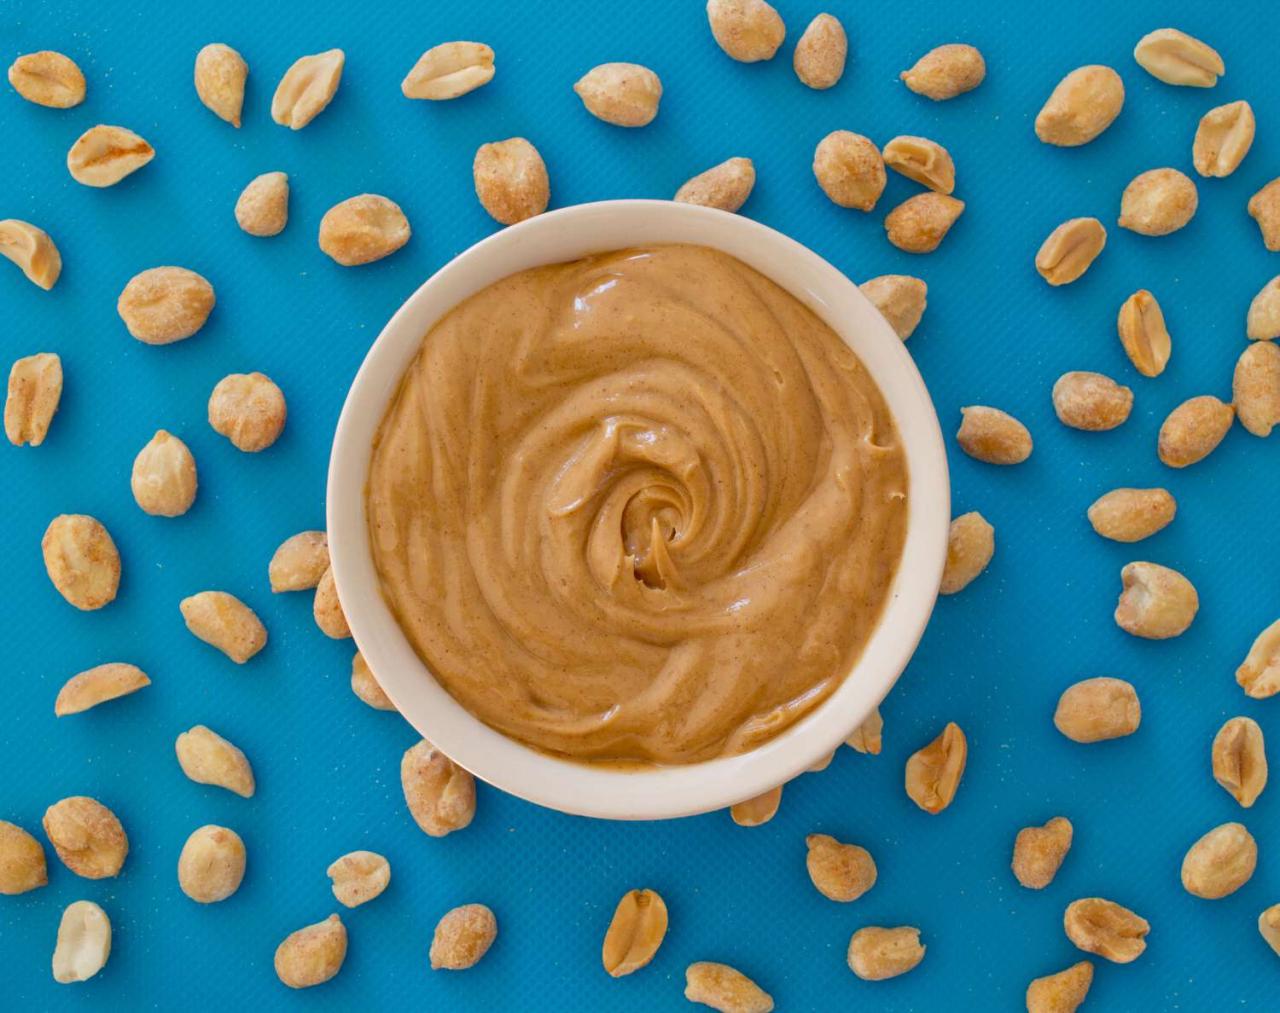 Do You Need To Refrigerate Peanut Butter?